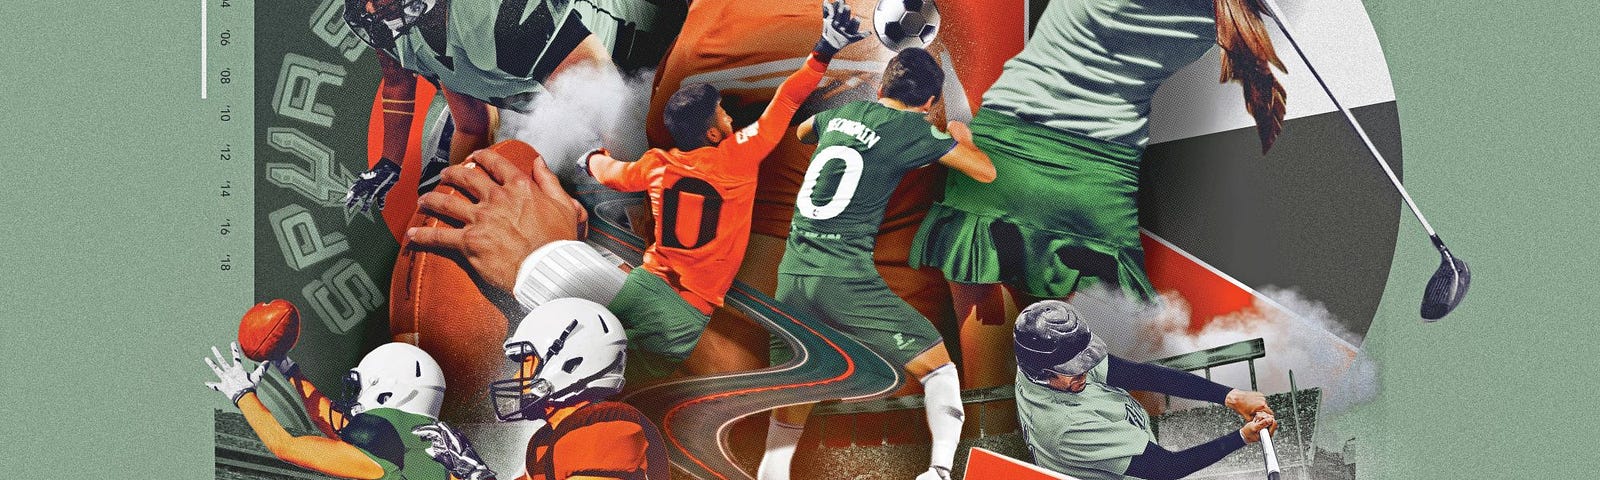 Collage of athletes, including the San Antonio Spurs and Texas Longhorns, and various green, orange, and sports-themed symbols.